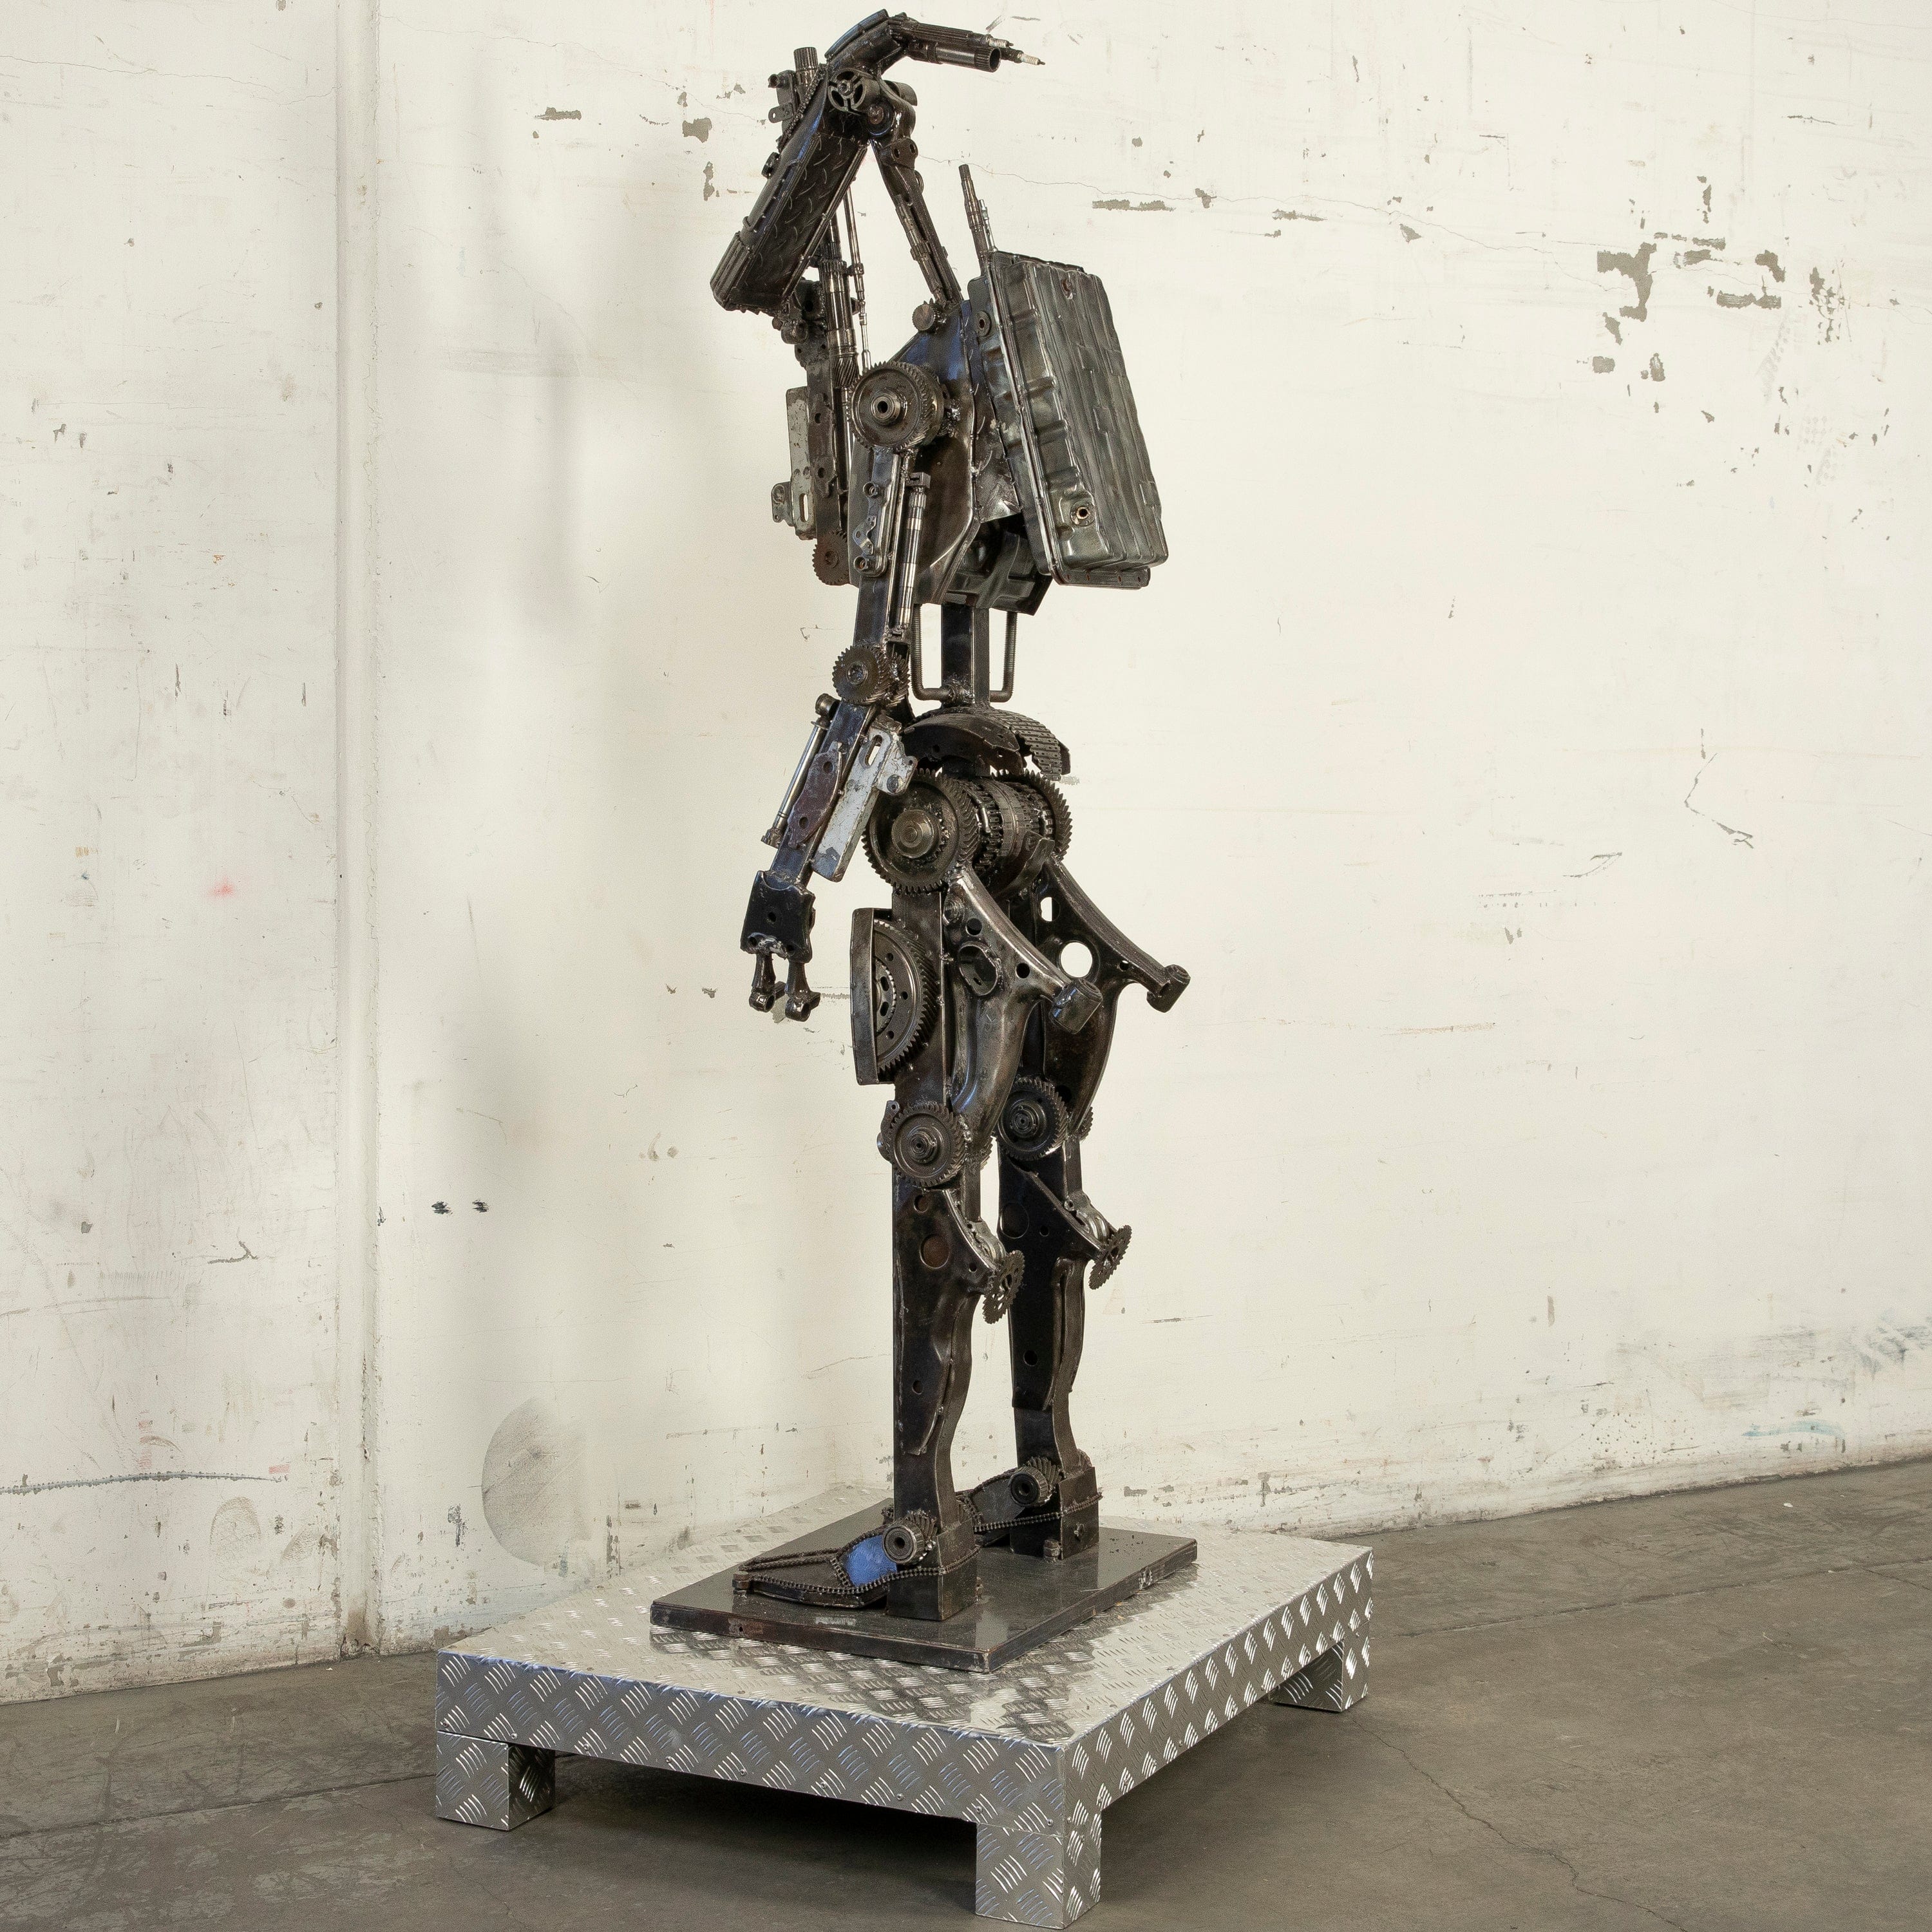 KALIFANO Recycled Metal Art 79" Droid Inspired Recycled Metal Sculpture RMS-DROID200-N